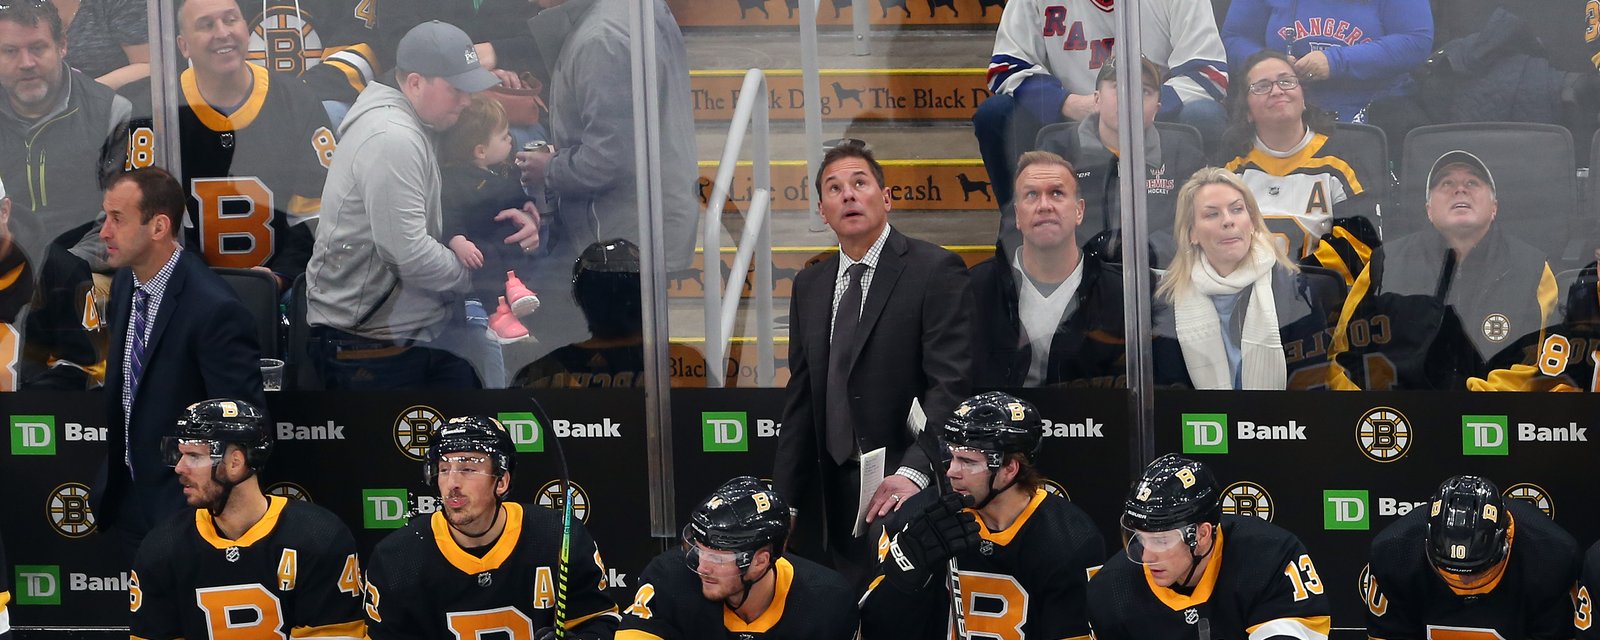 While the Bruins are hot, most of their starts are not